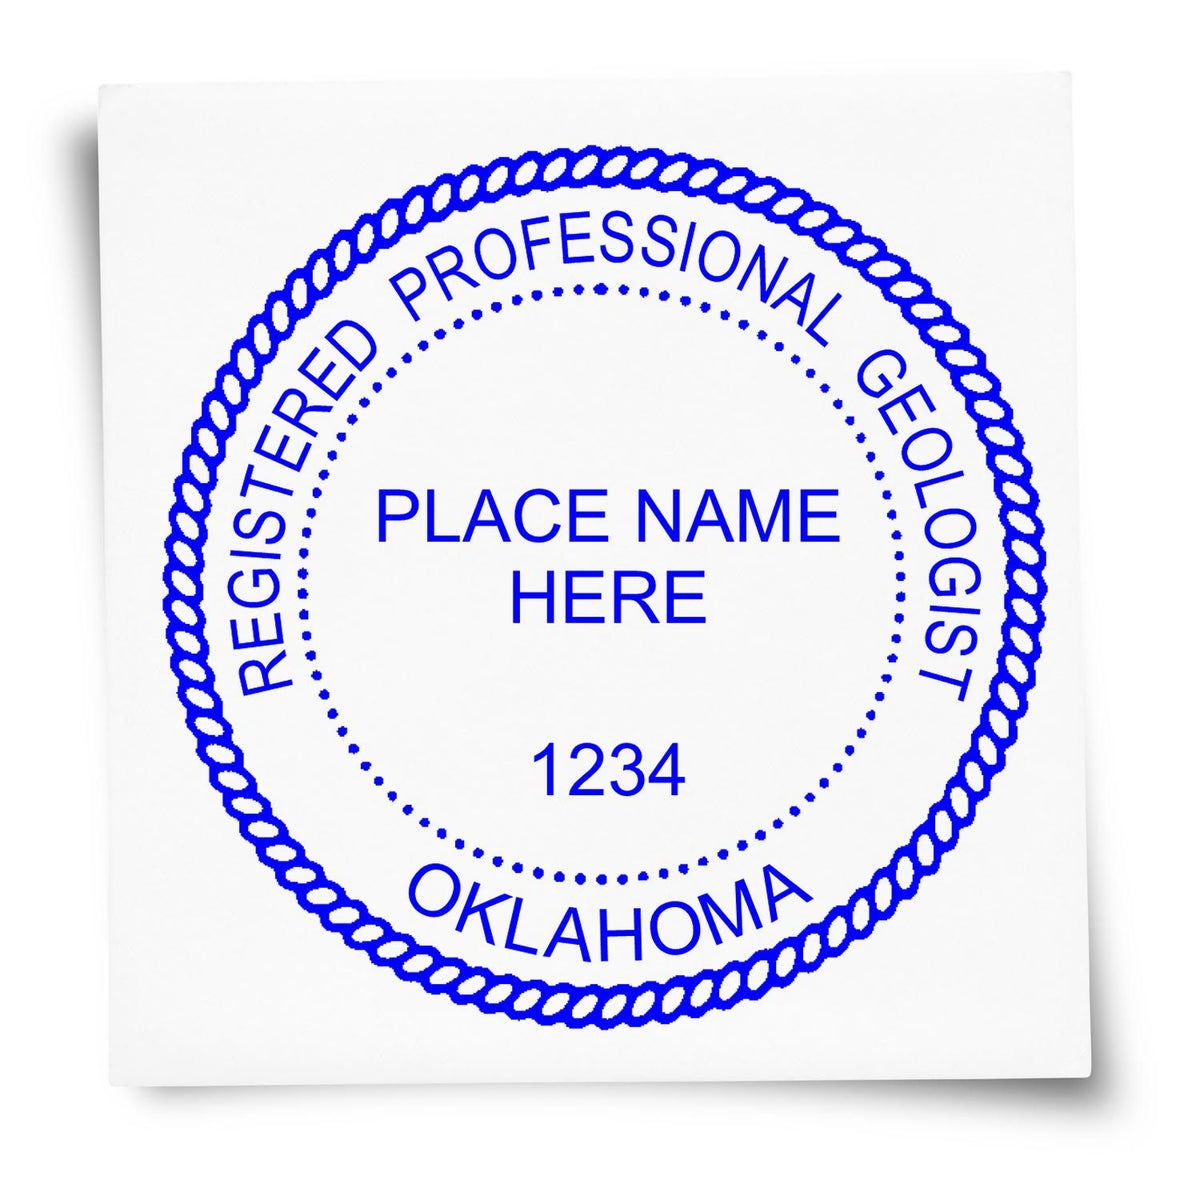 Another Example of a stamped impression of the Premium MaxLight Pre-Inked Oklahoma Geology Stamp on a office form